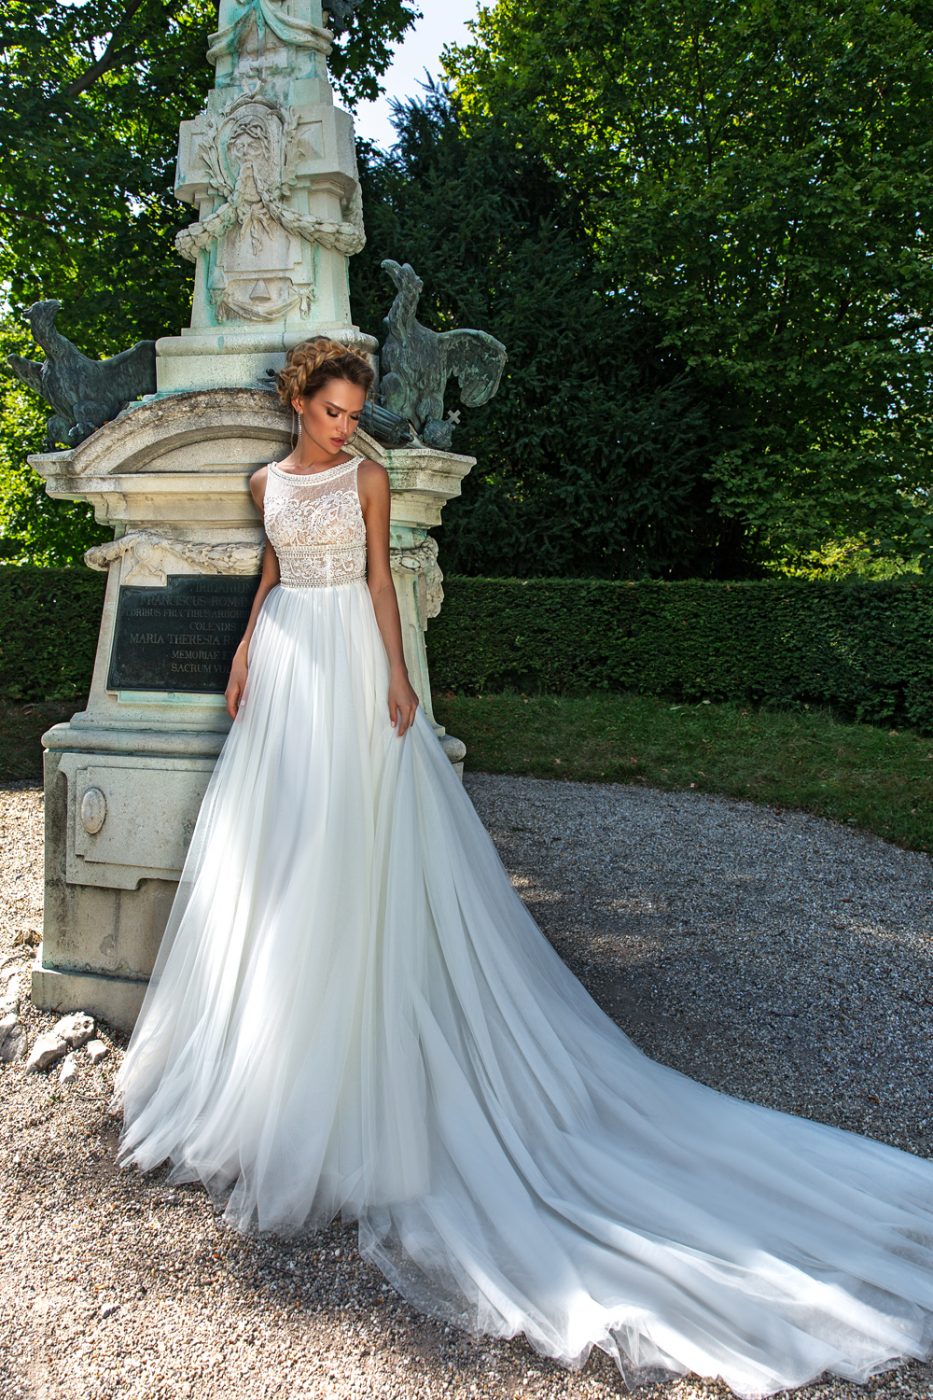 scoop neck wedding gown by Crystal Design Couture